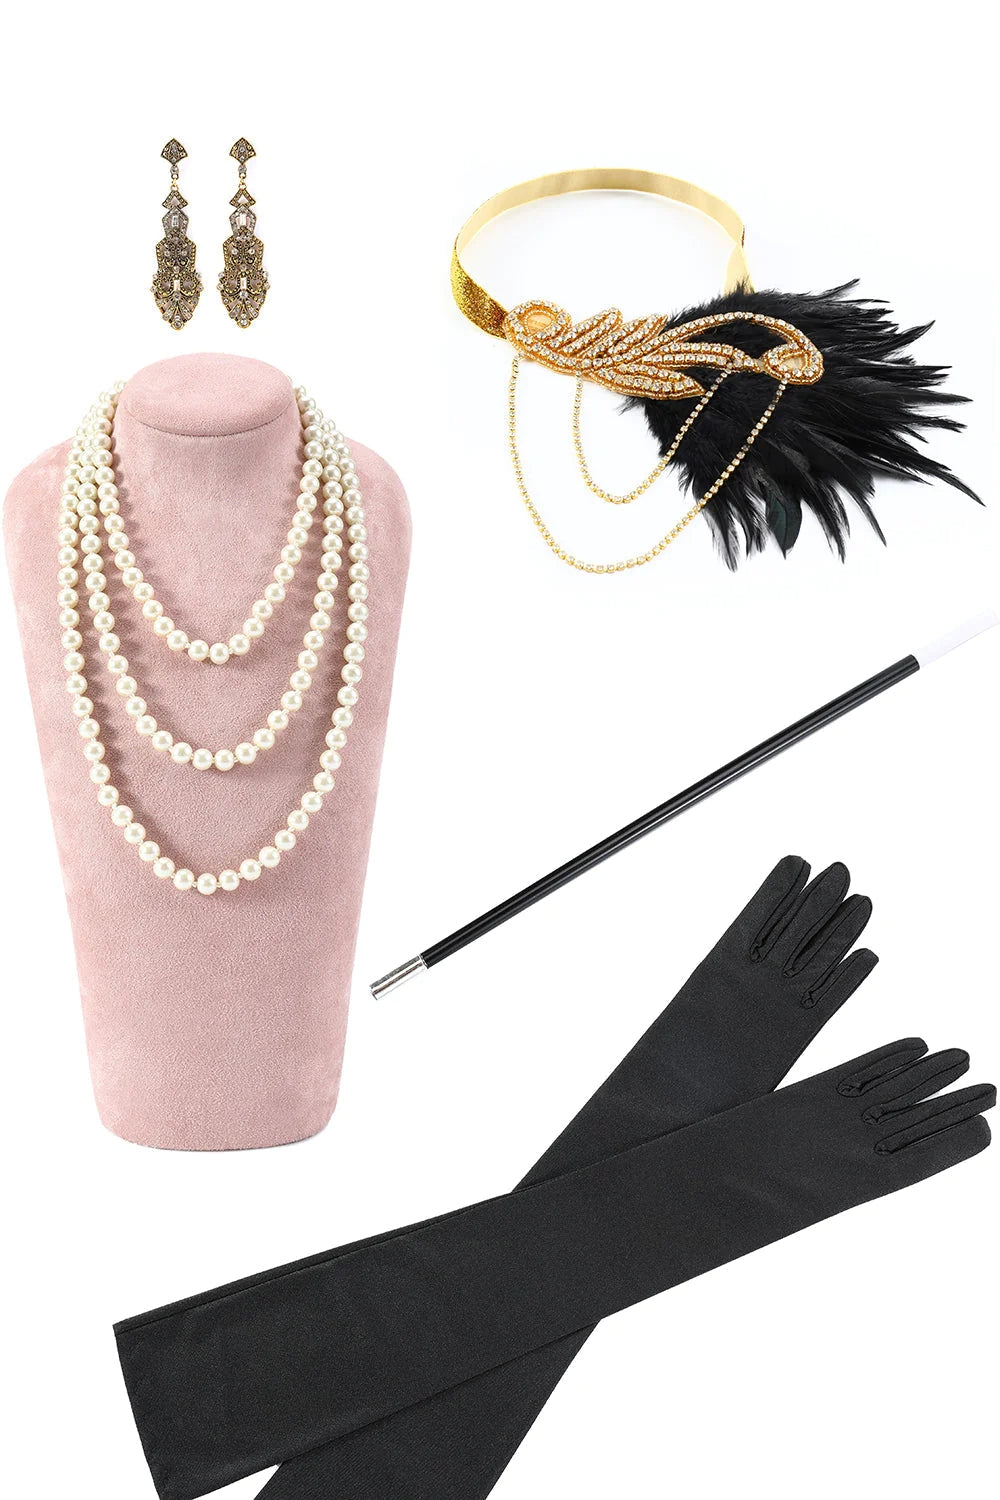 Black and Golden Sequins Fringes 1920s Gatsby Flapper Dress with 20s Accessories Set